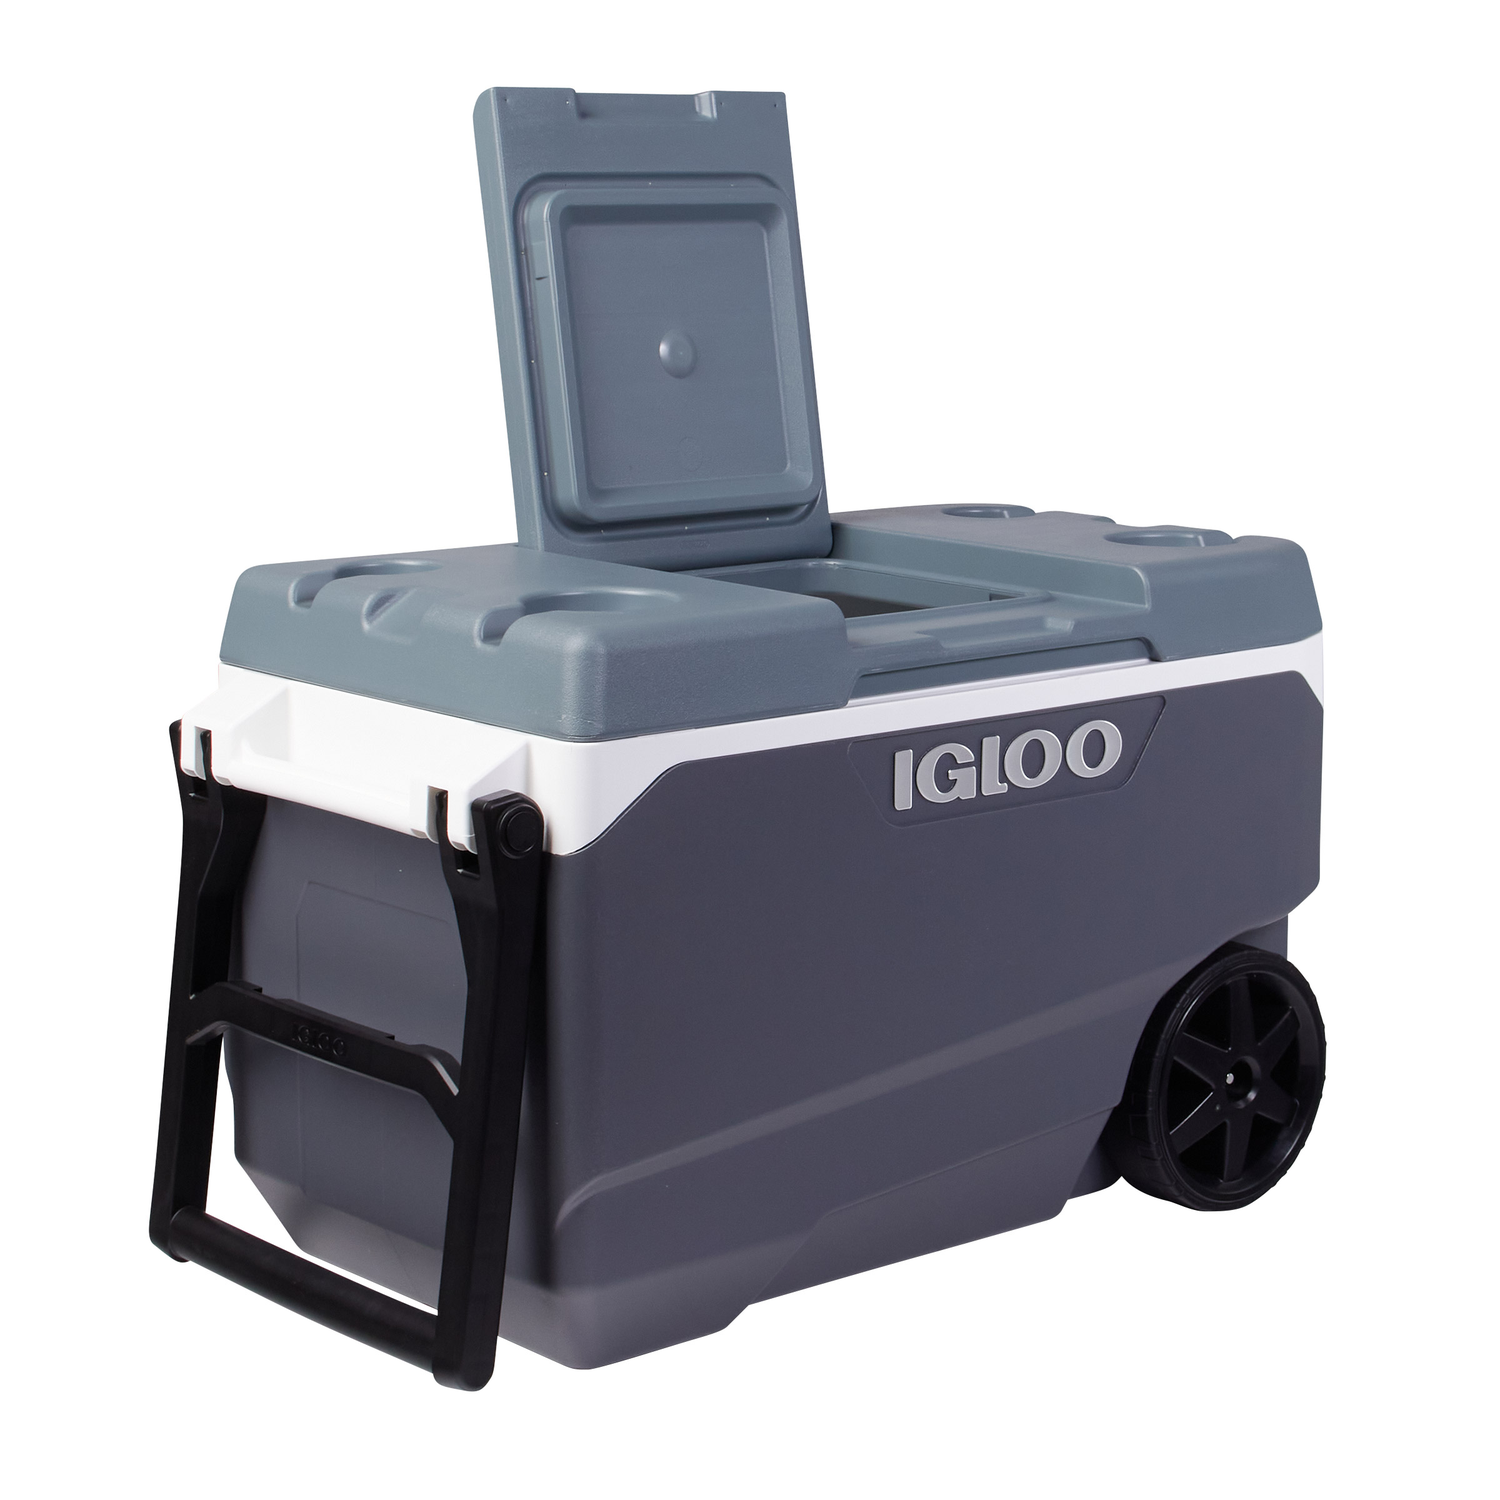 Igloo Maxcold Latitude Flip And Tow Wheeled Cooler - 85 liters HOG-Home Office Garden online marketplace.